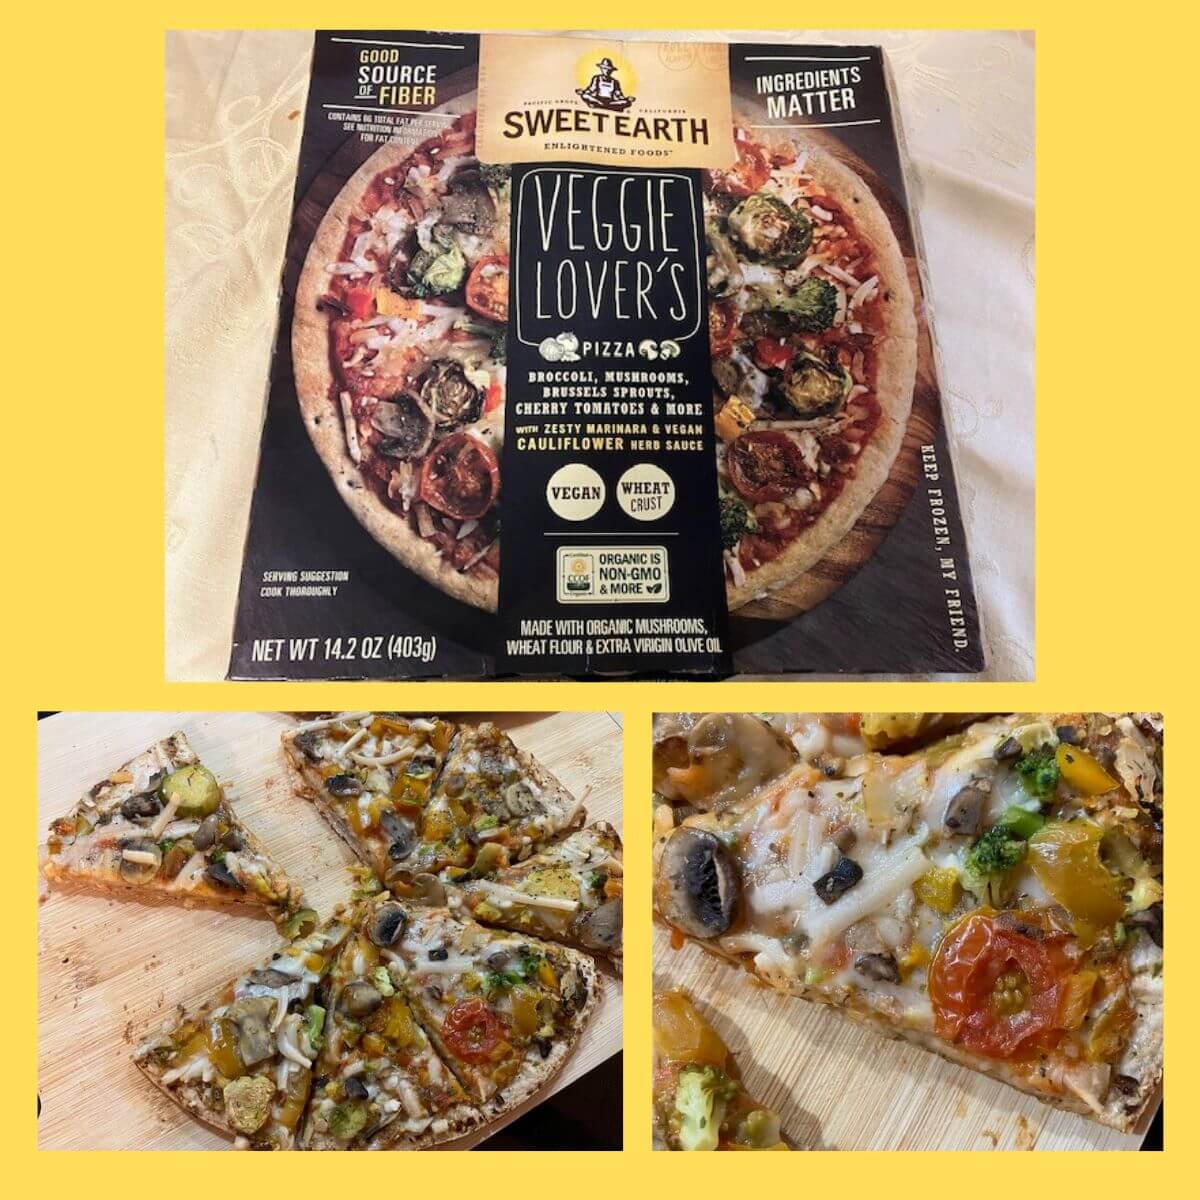 three pictures on a yellow background. 1 of a sweet earth veggie lovers pizza box. the second: most of the pizza on a cutting board, third picture: a close up of a slice of pizza.